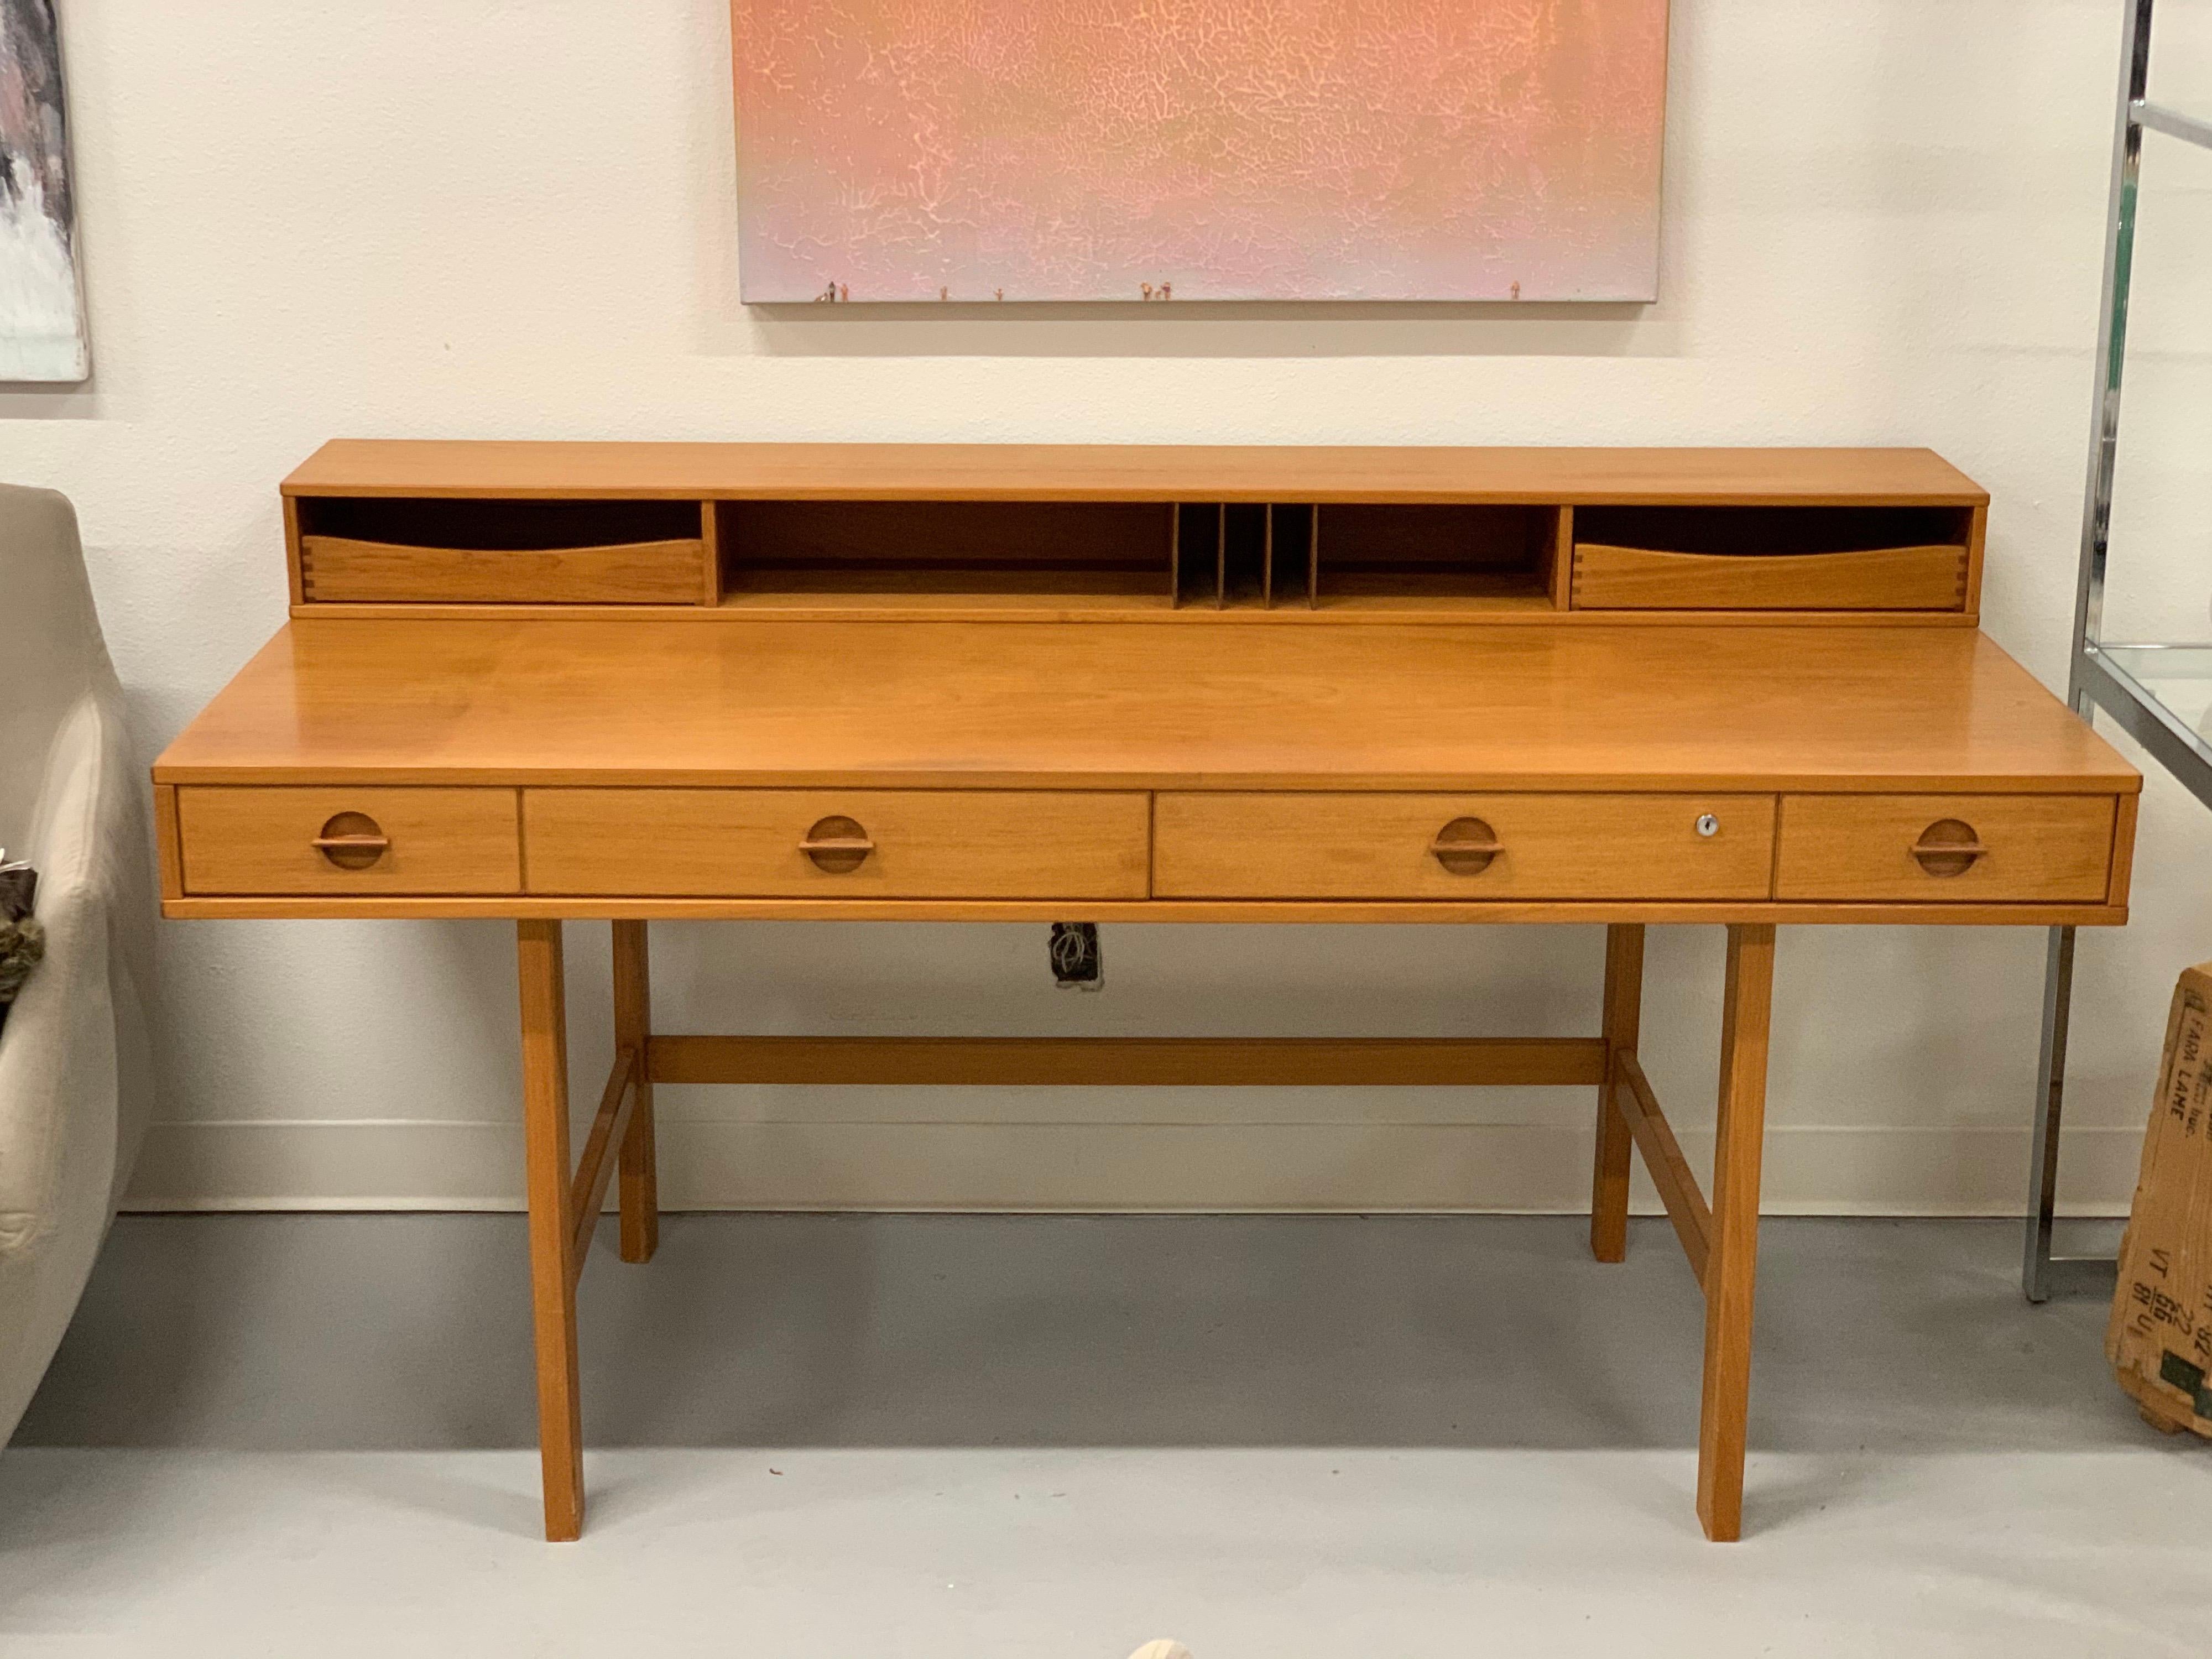 A vintage Scandinavian teak desk by Peter Lovig Nielsen from the 1970s. It has been described as being designed by Jens Quistgaard. The top back flips over and lies flat to increase the surface area. The piece is in original condition and has some